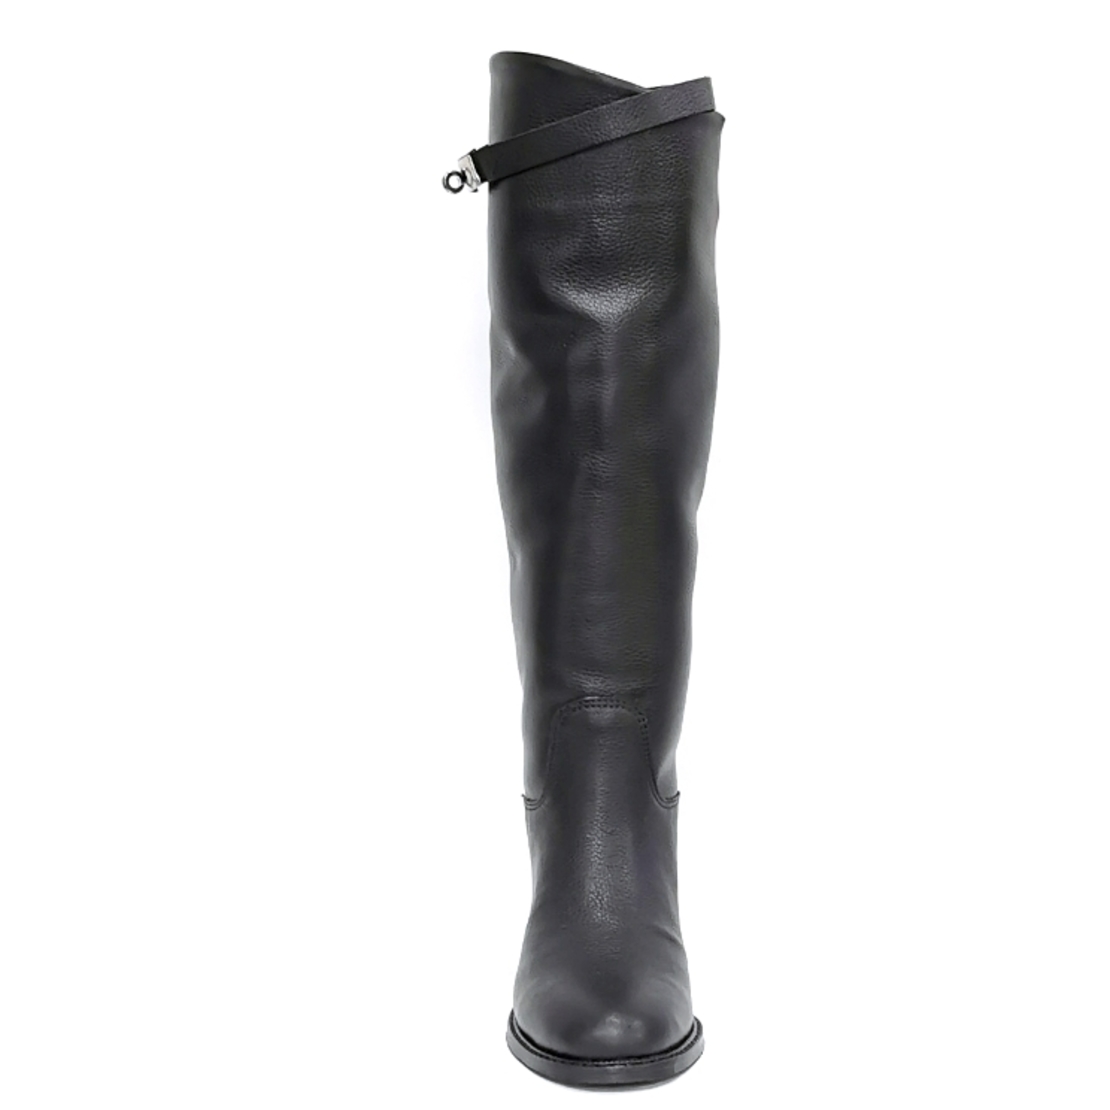 Women's casual boots made of natural leather in black/73419